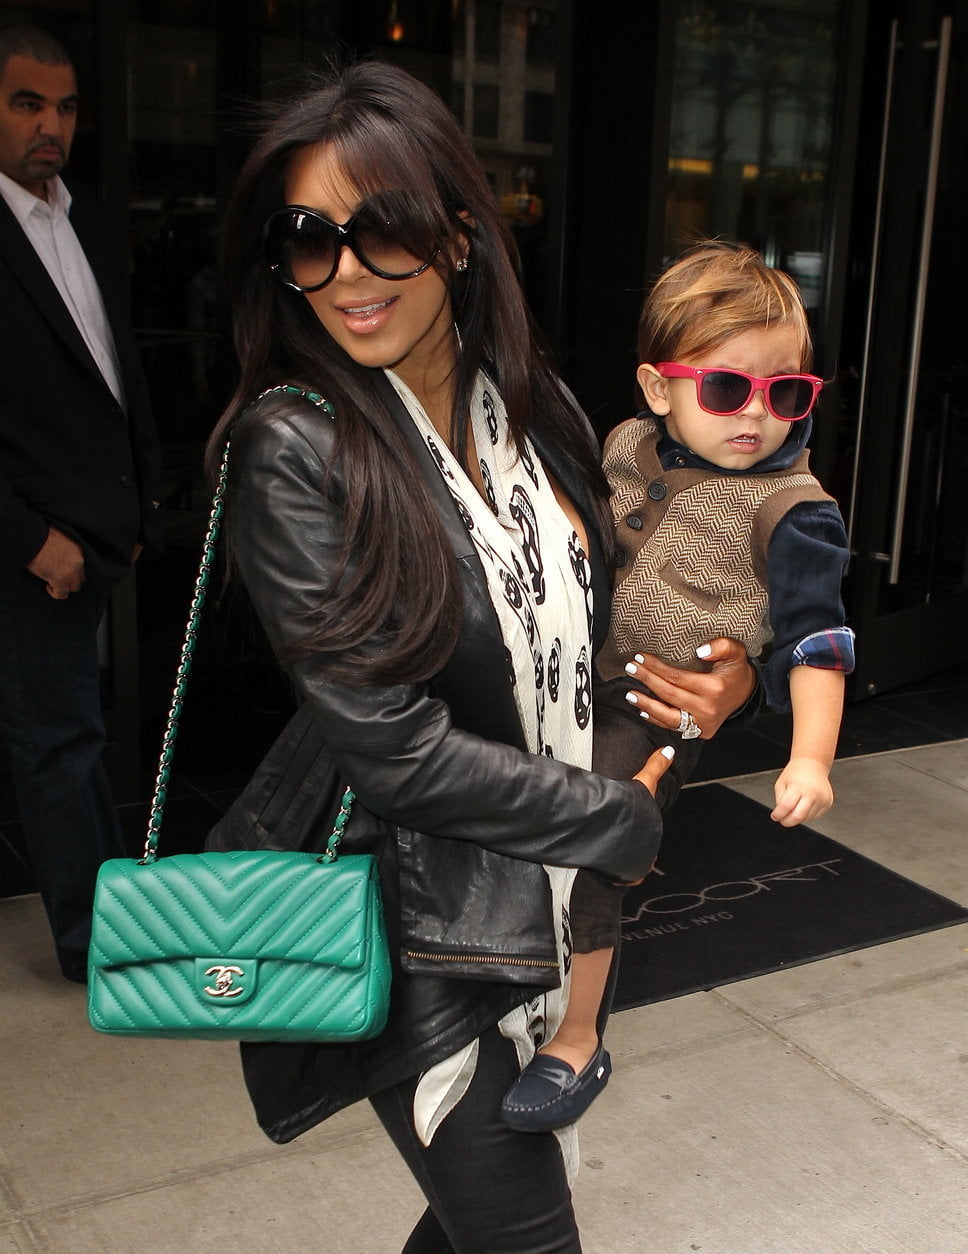 Chanelbb - A-Lister celebrities carrying their Chanel WOC!